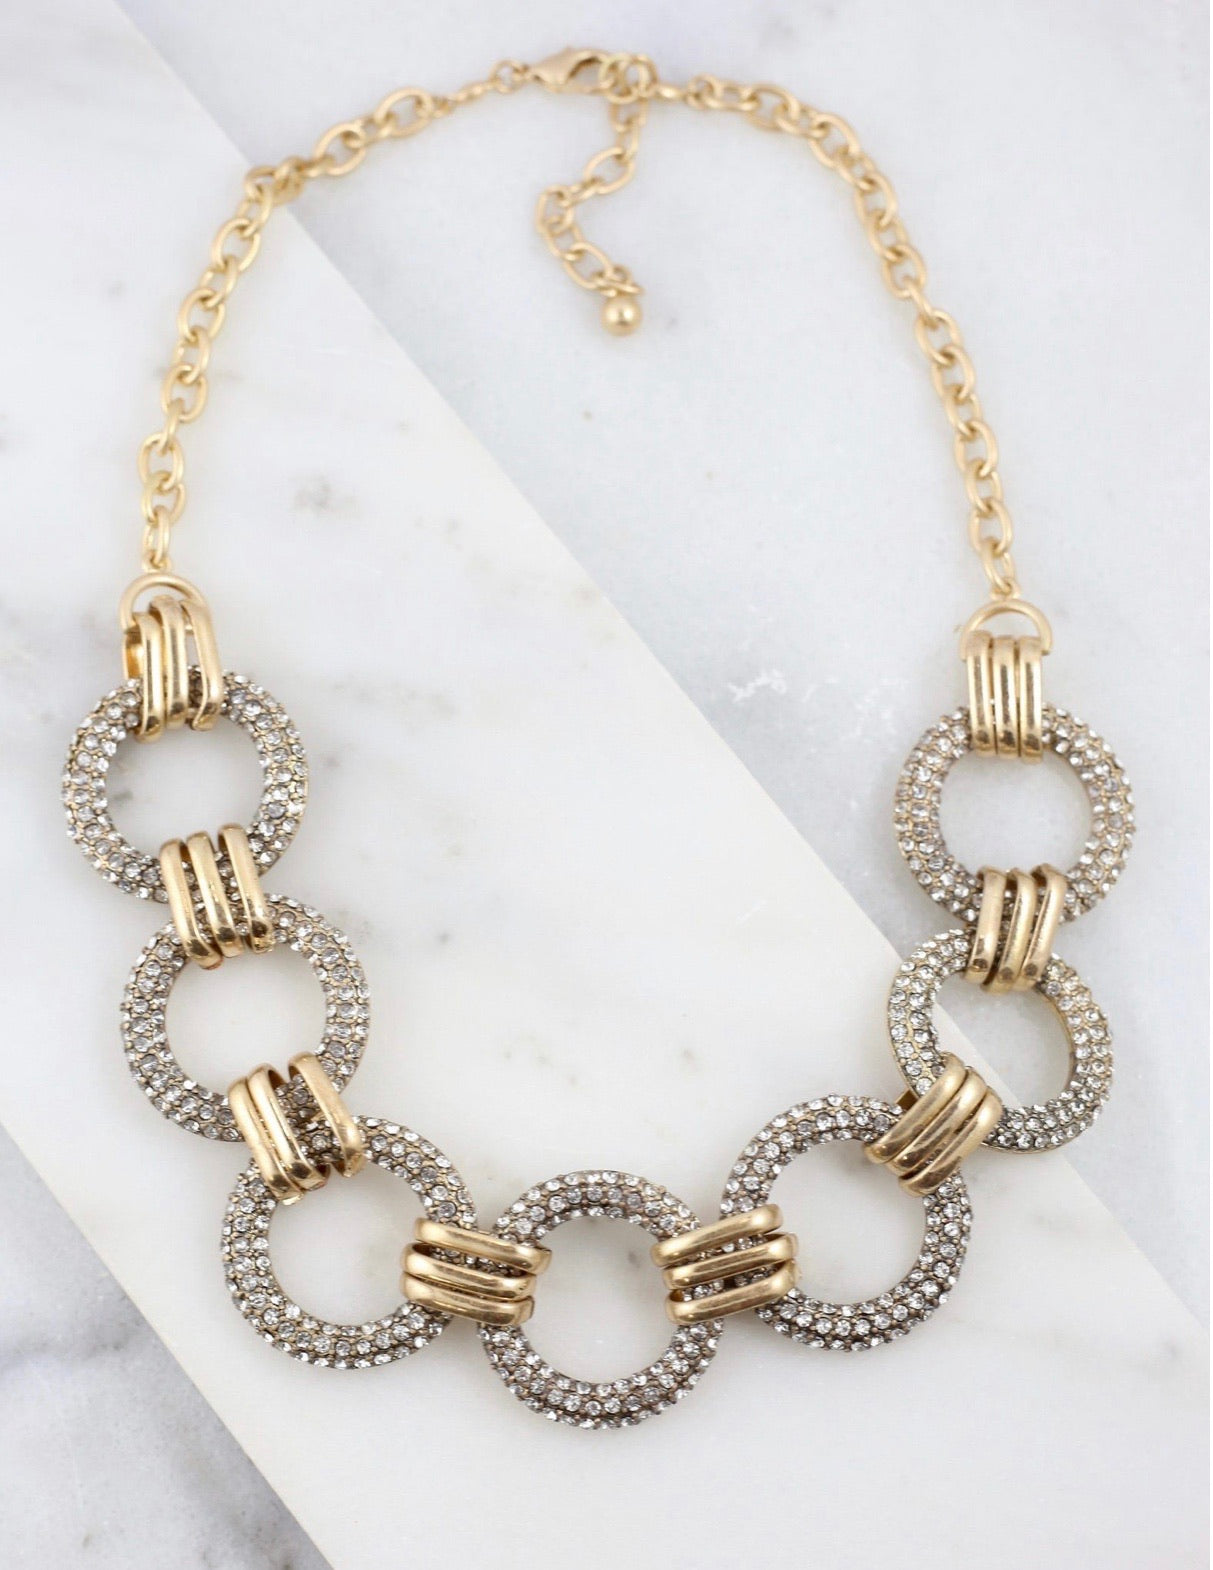 Frilly Link Necklace Gold - Corinne an Affordable Women's Clothing Boutique in the US USA